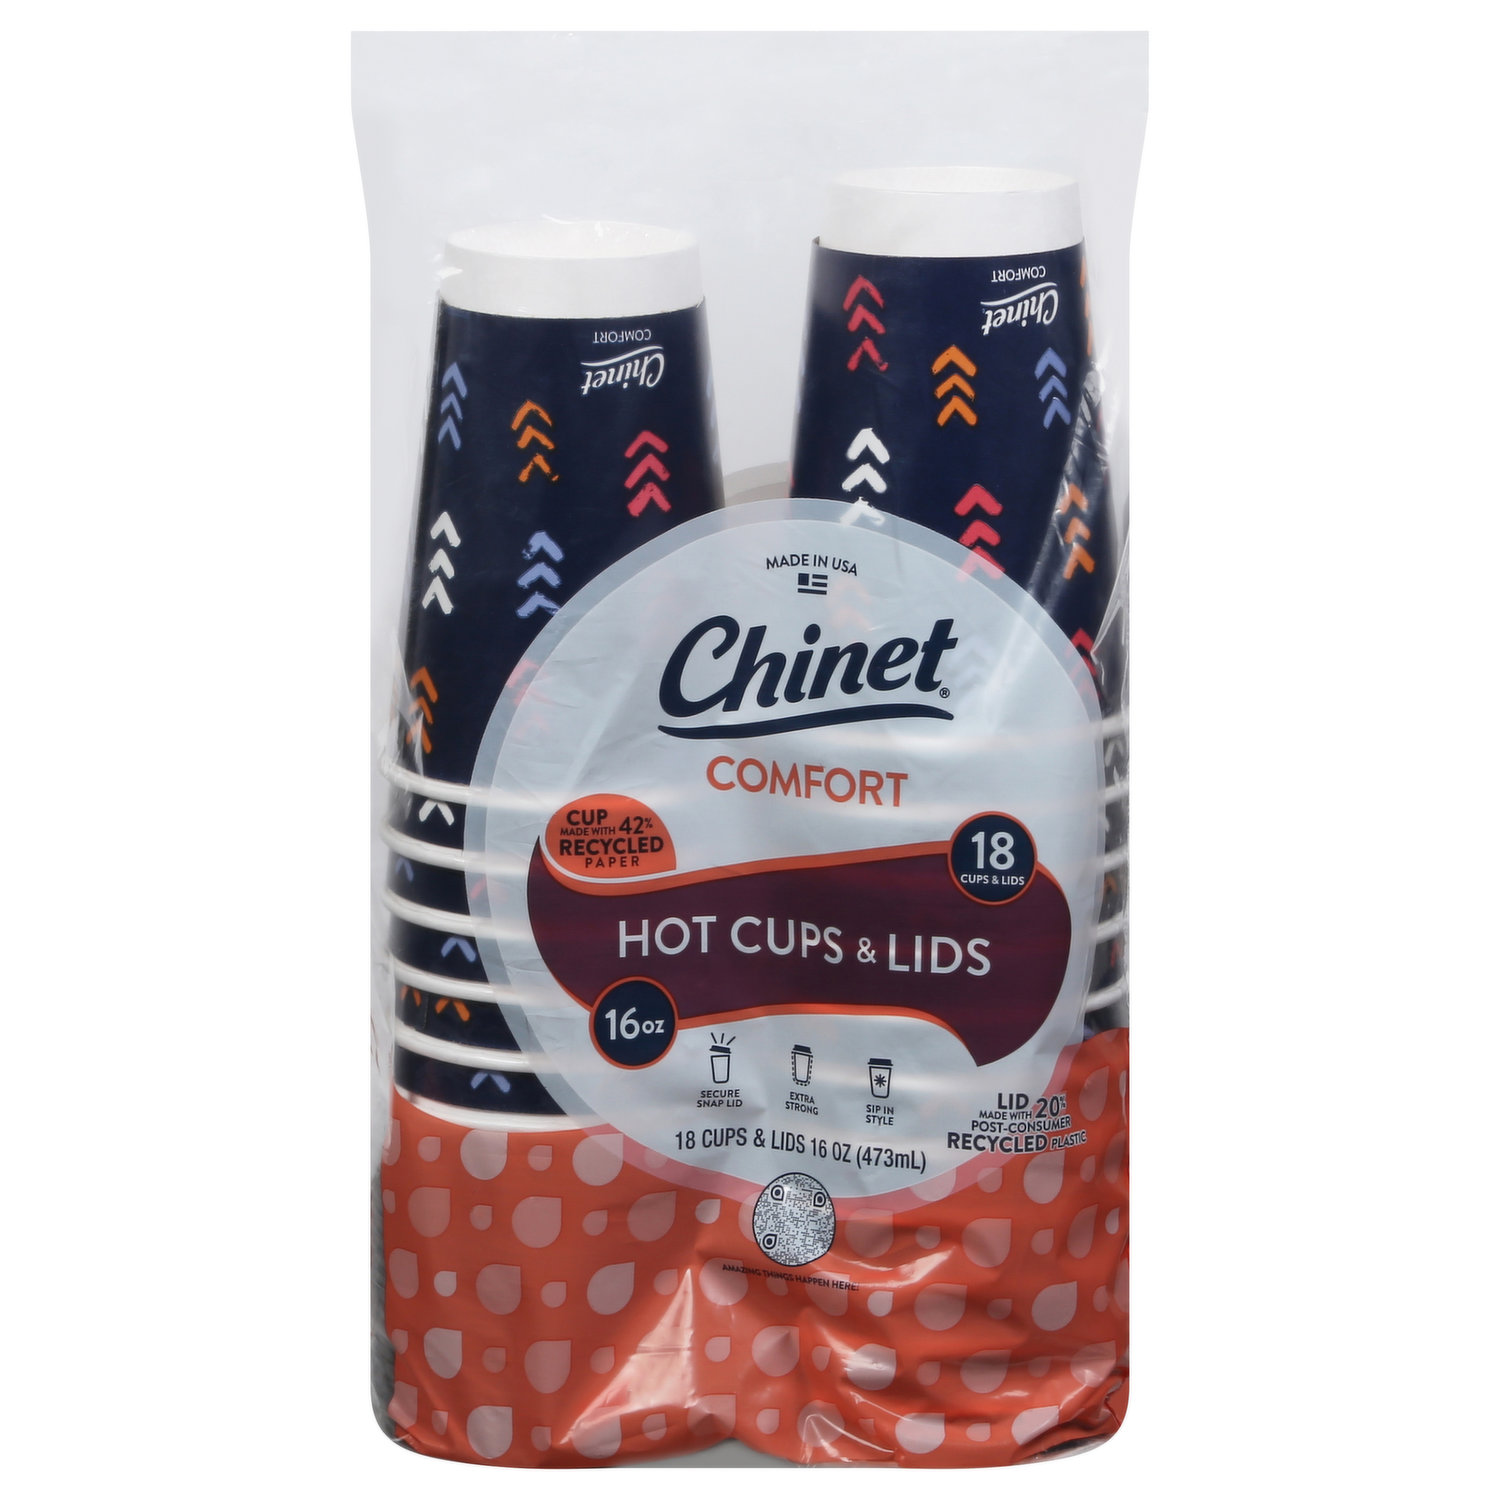 Chinet Comfort 16 oz Cup & Lid, 80-count